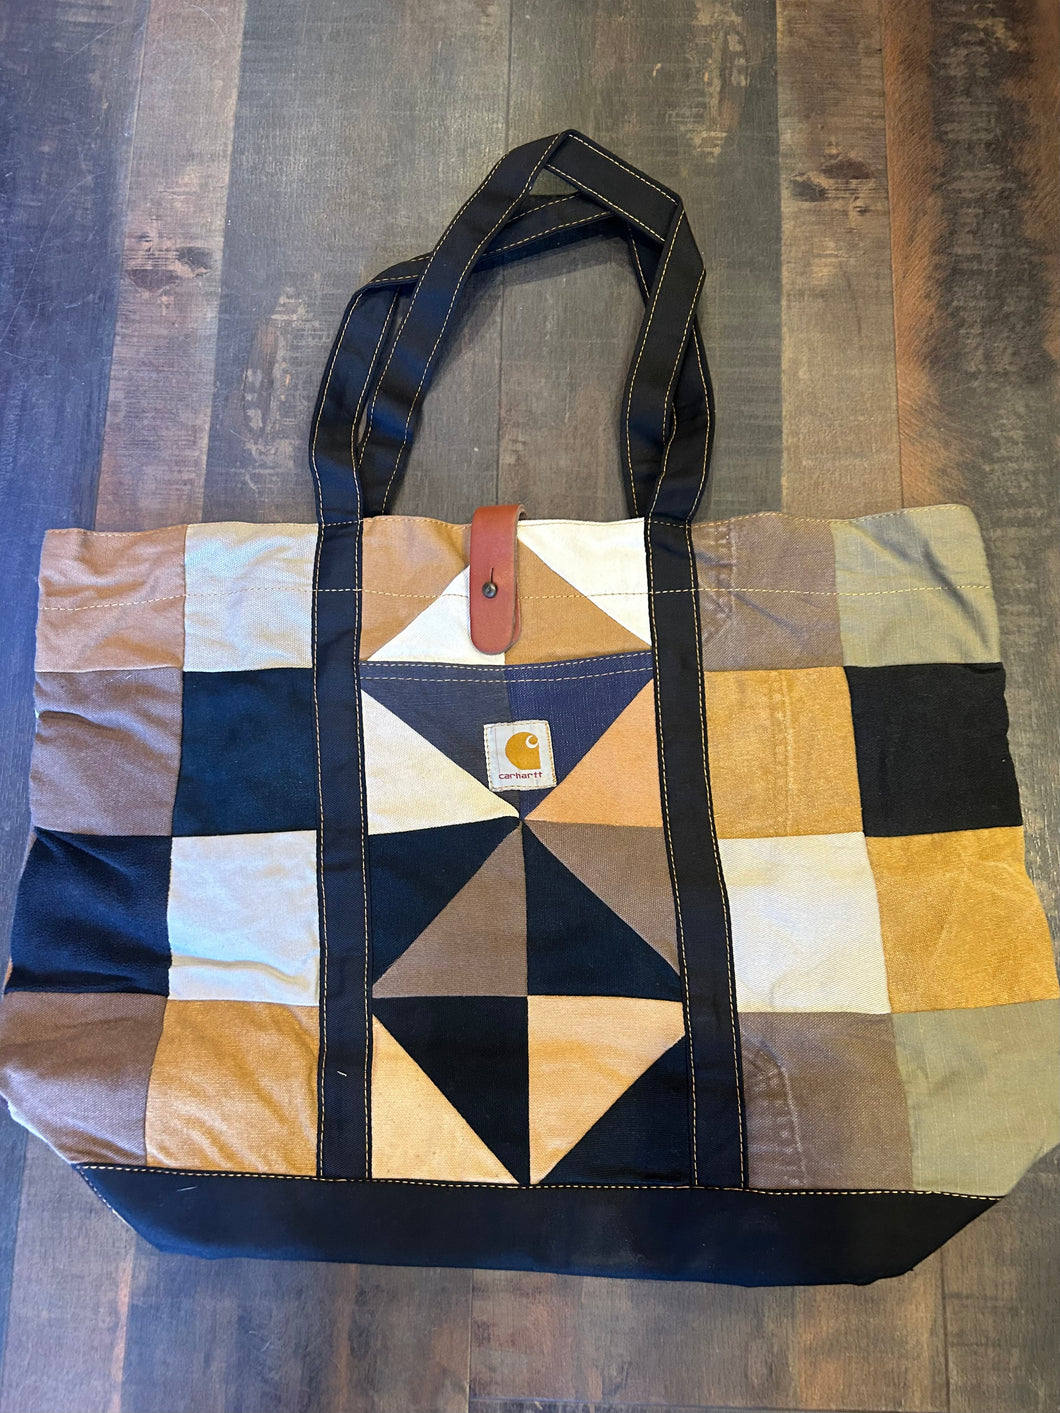 37. Patchwork Reworked Carhartt Tote